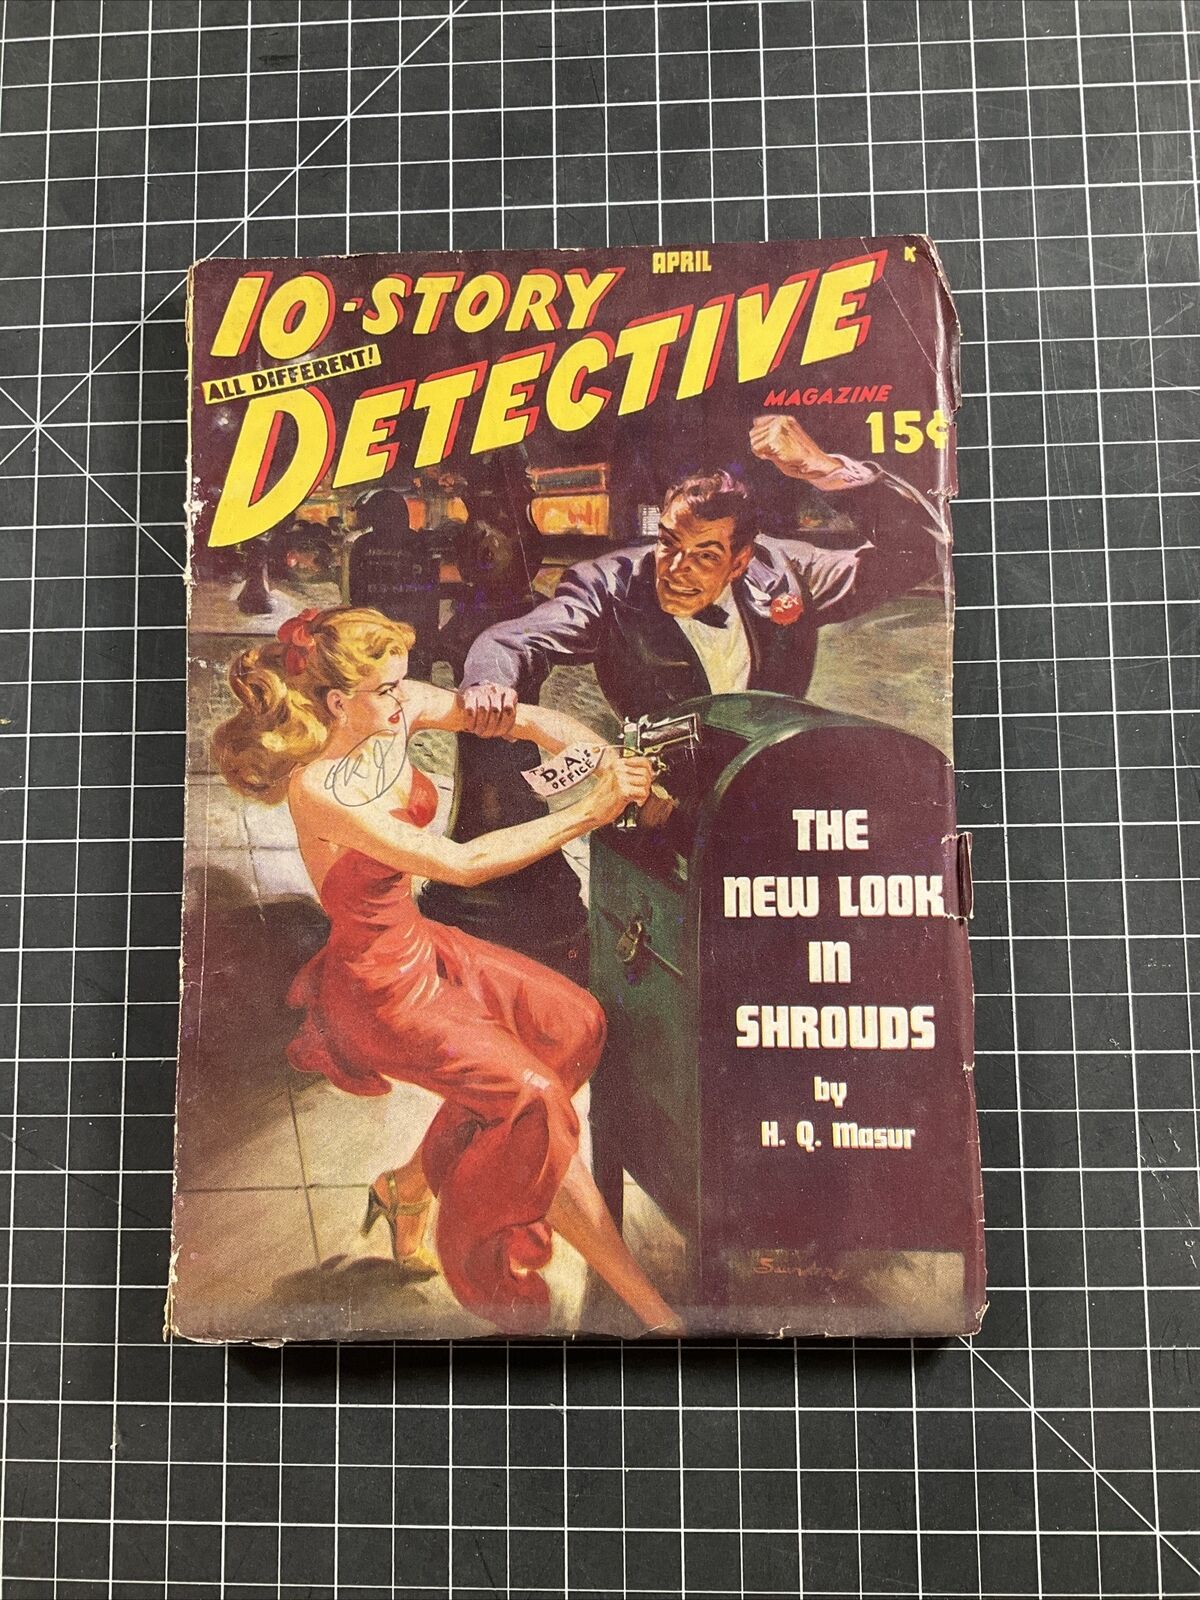 10-Story Detective 1949 April. Cover by Norman Saunders.   Pulp